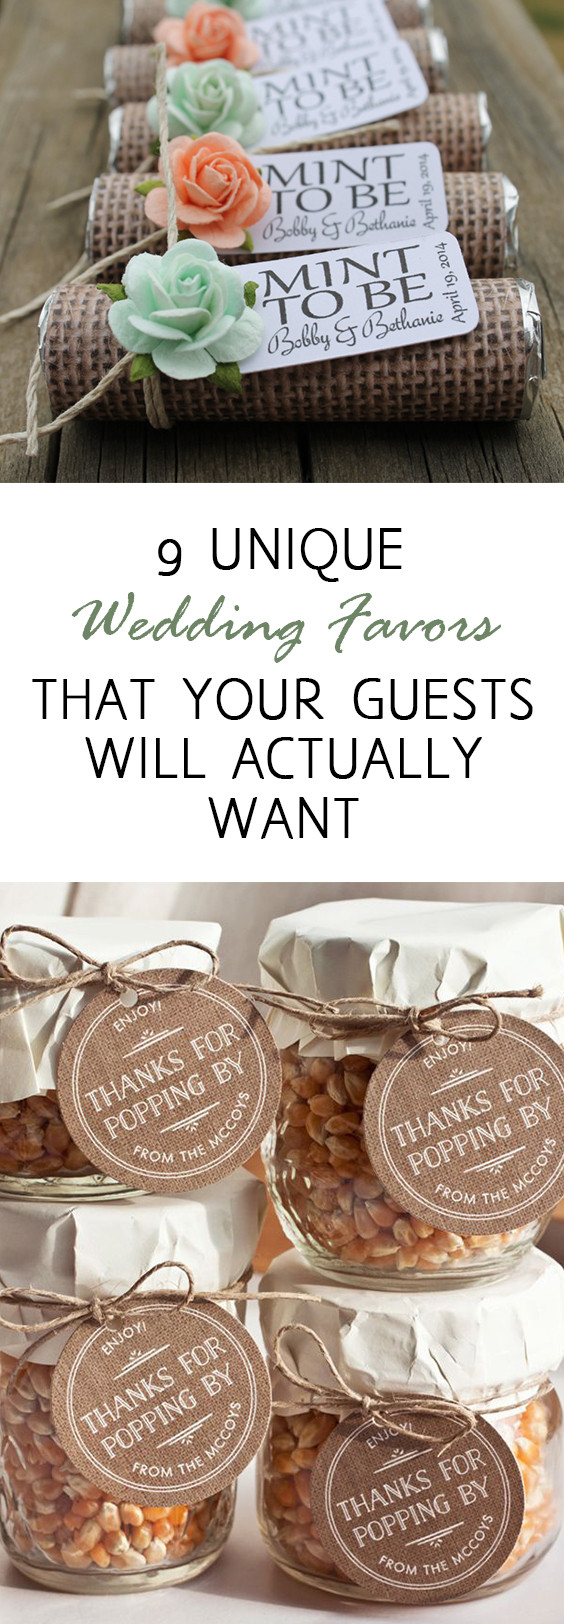 Wedding Favors For Guests
 9 Unique Wedding Favors that Your Guests Will Actually